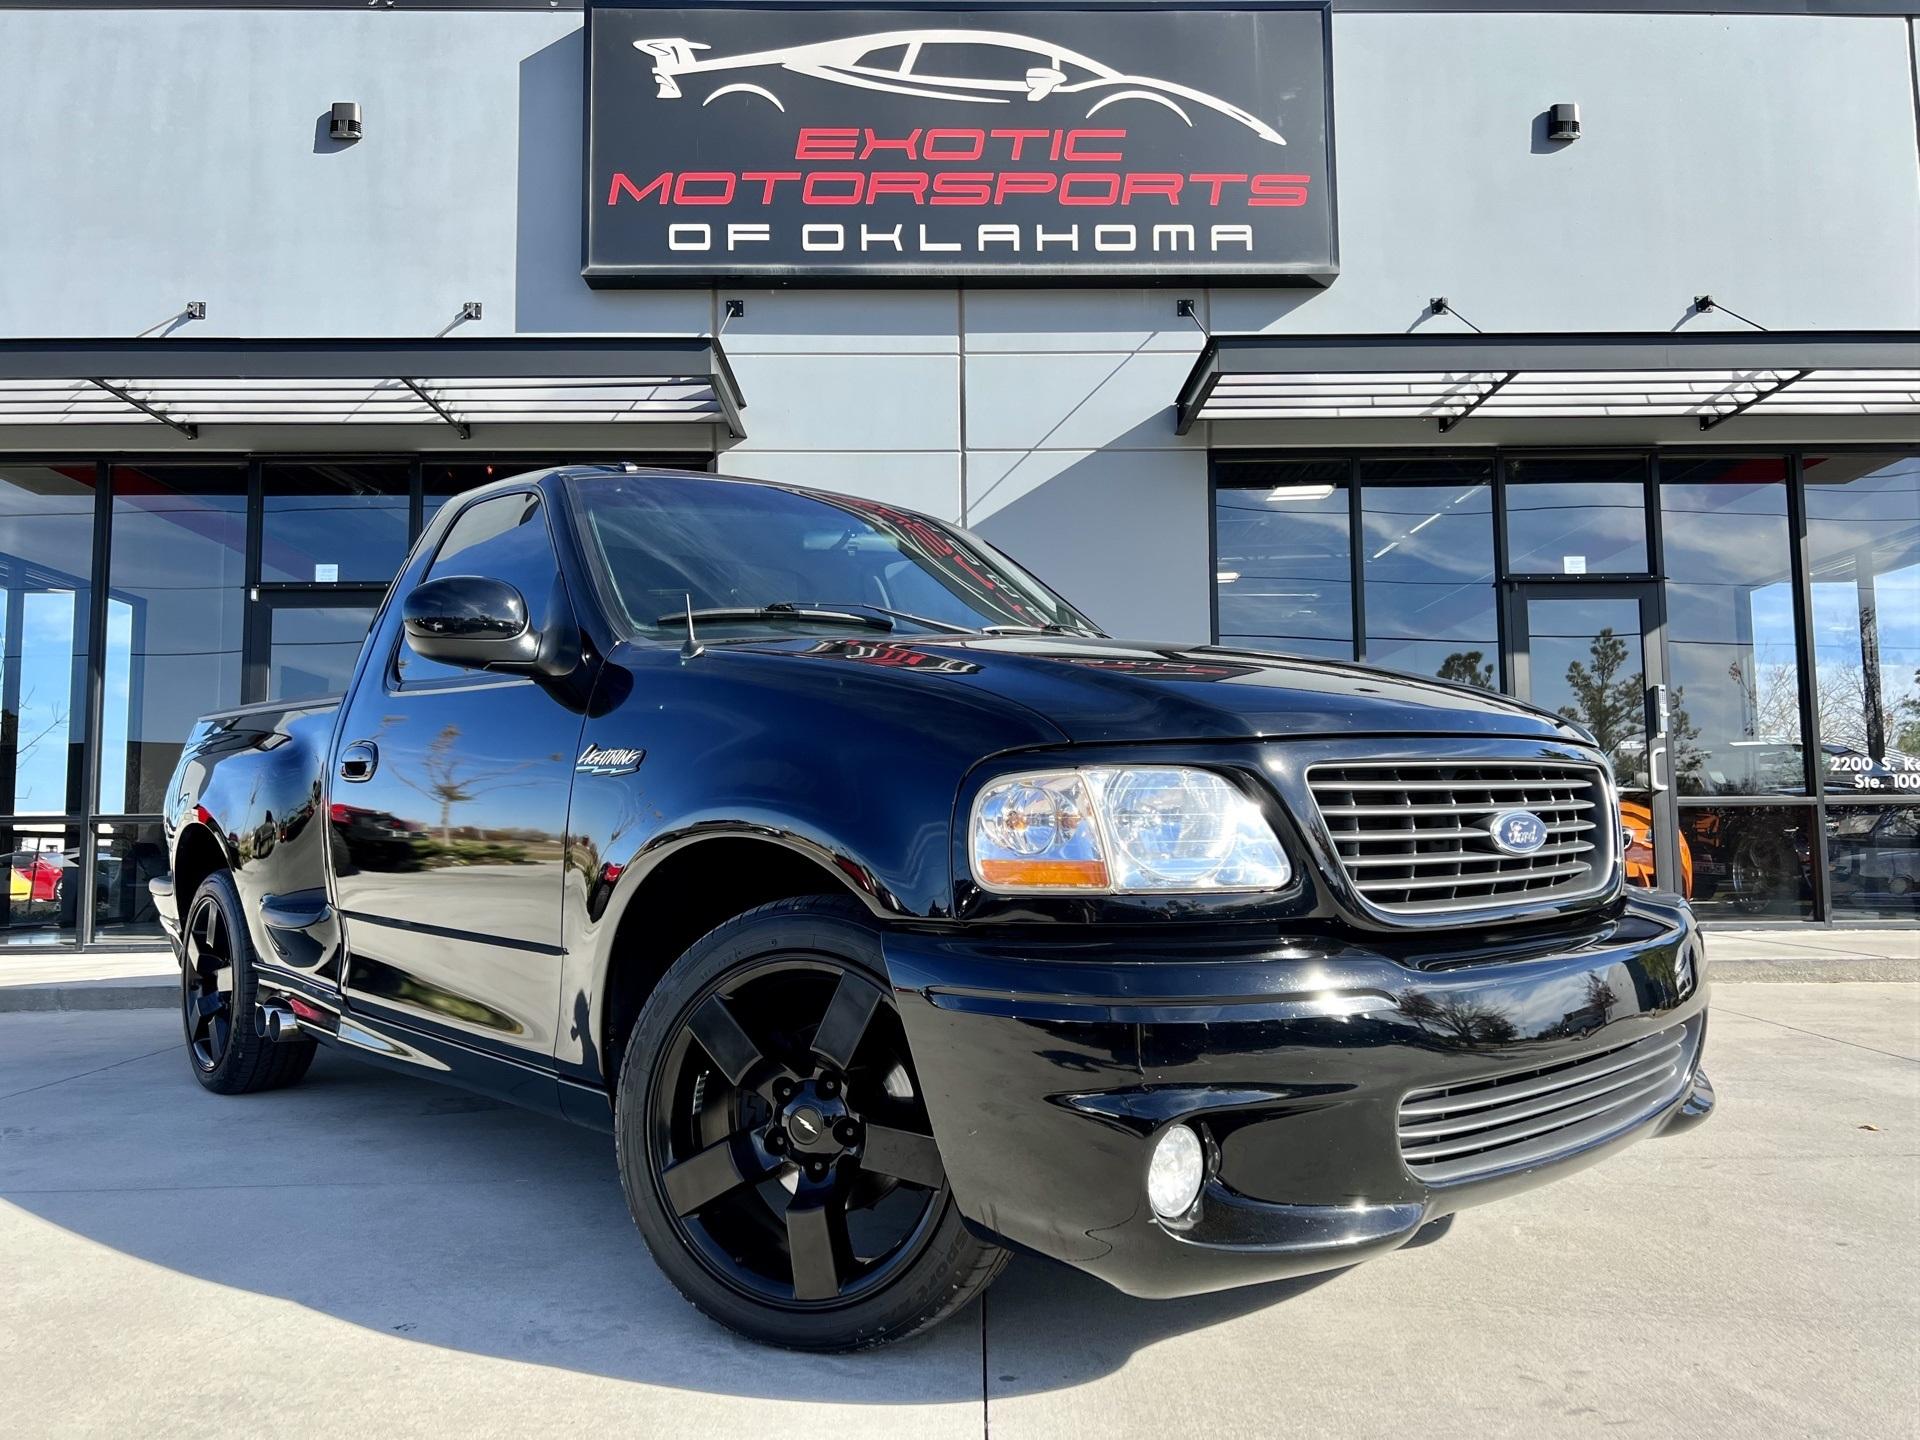 Used 2001 Ford F-150 SVT Lightning For Sale (Sold) | Exotic Motorsports of  Oklahoma Stock #A126